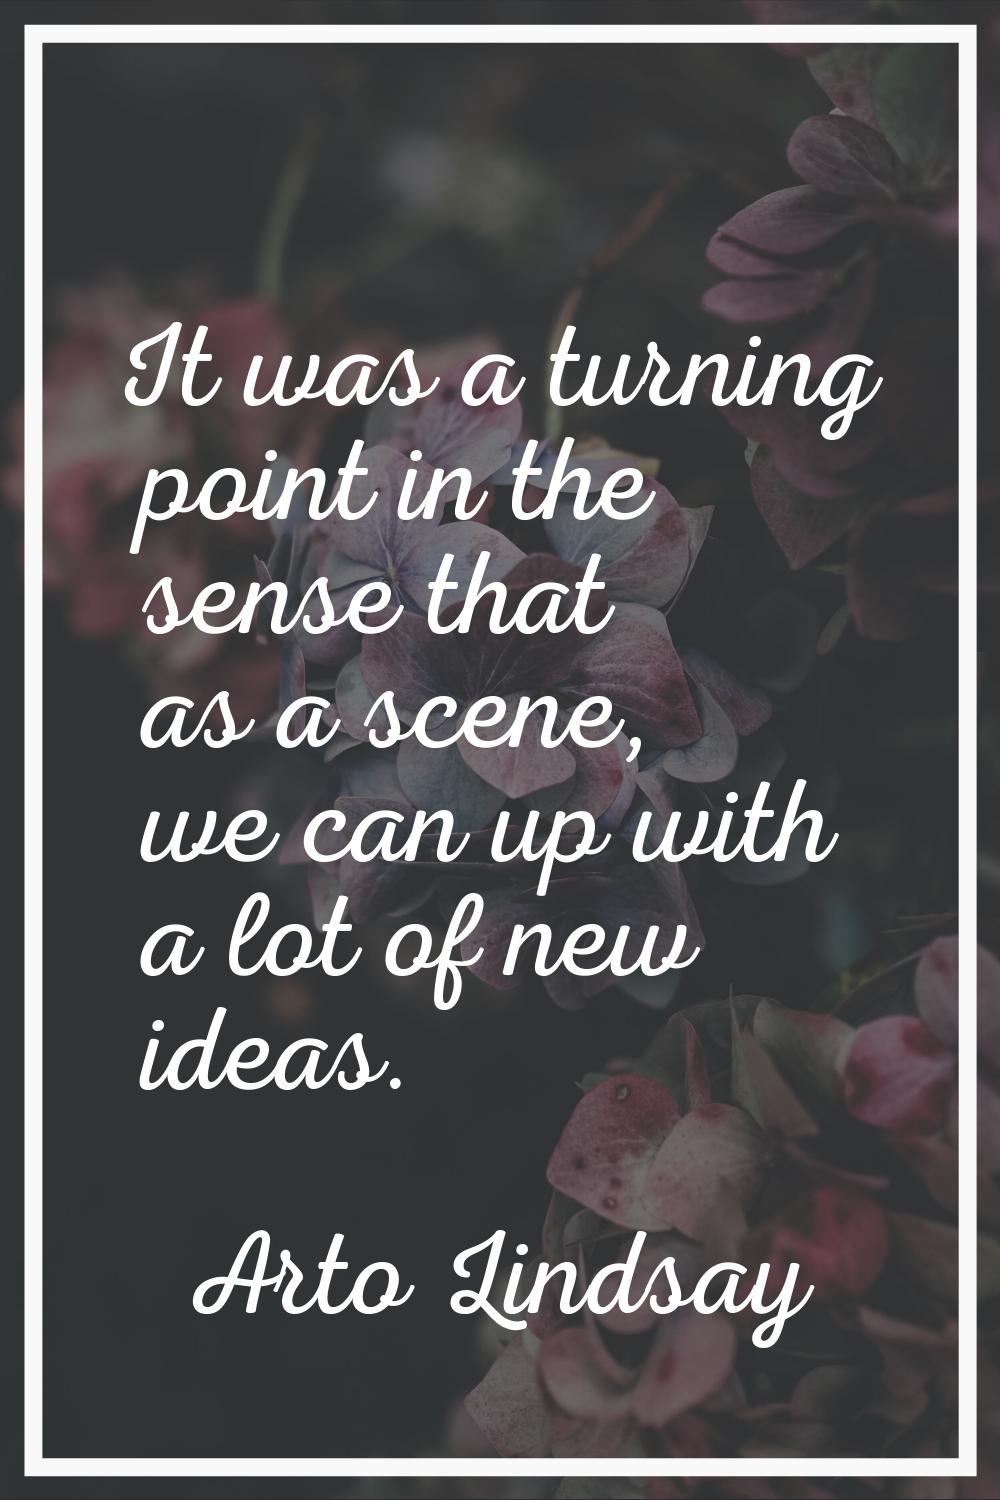 It was a turning point in the sense that as a scene, we can up with a lot of new ideas.